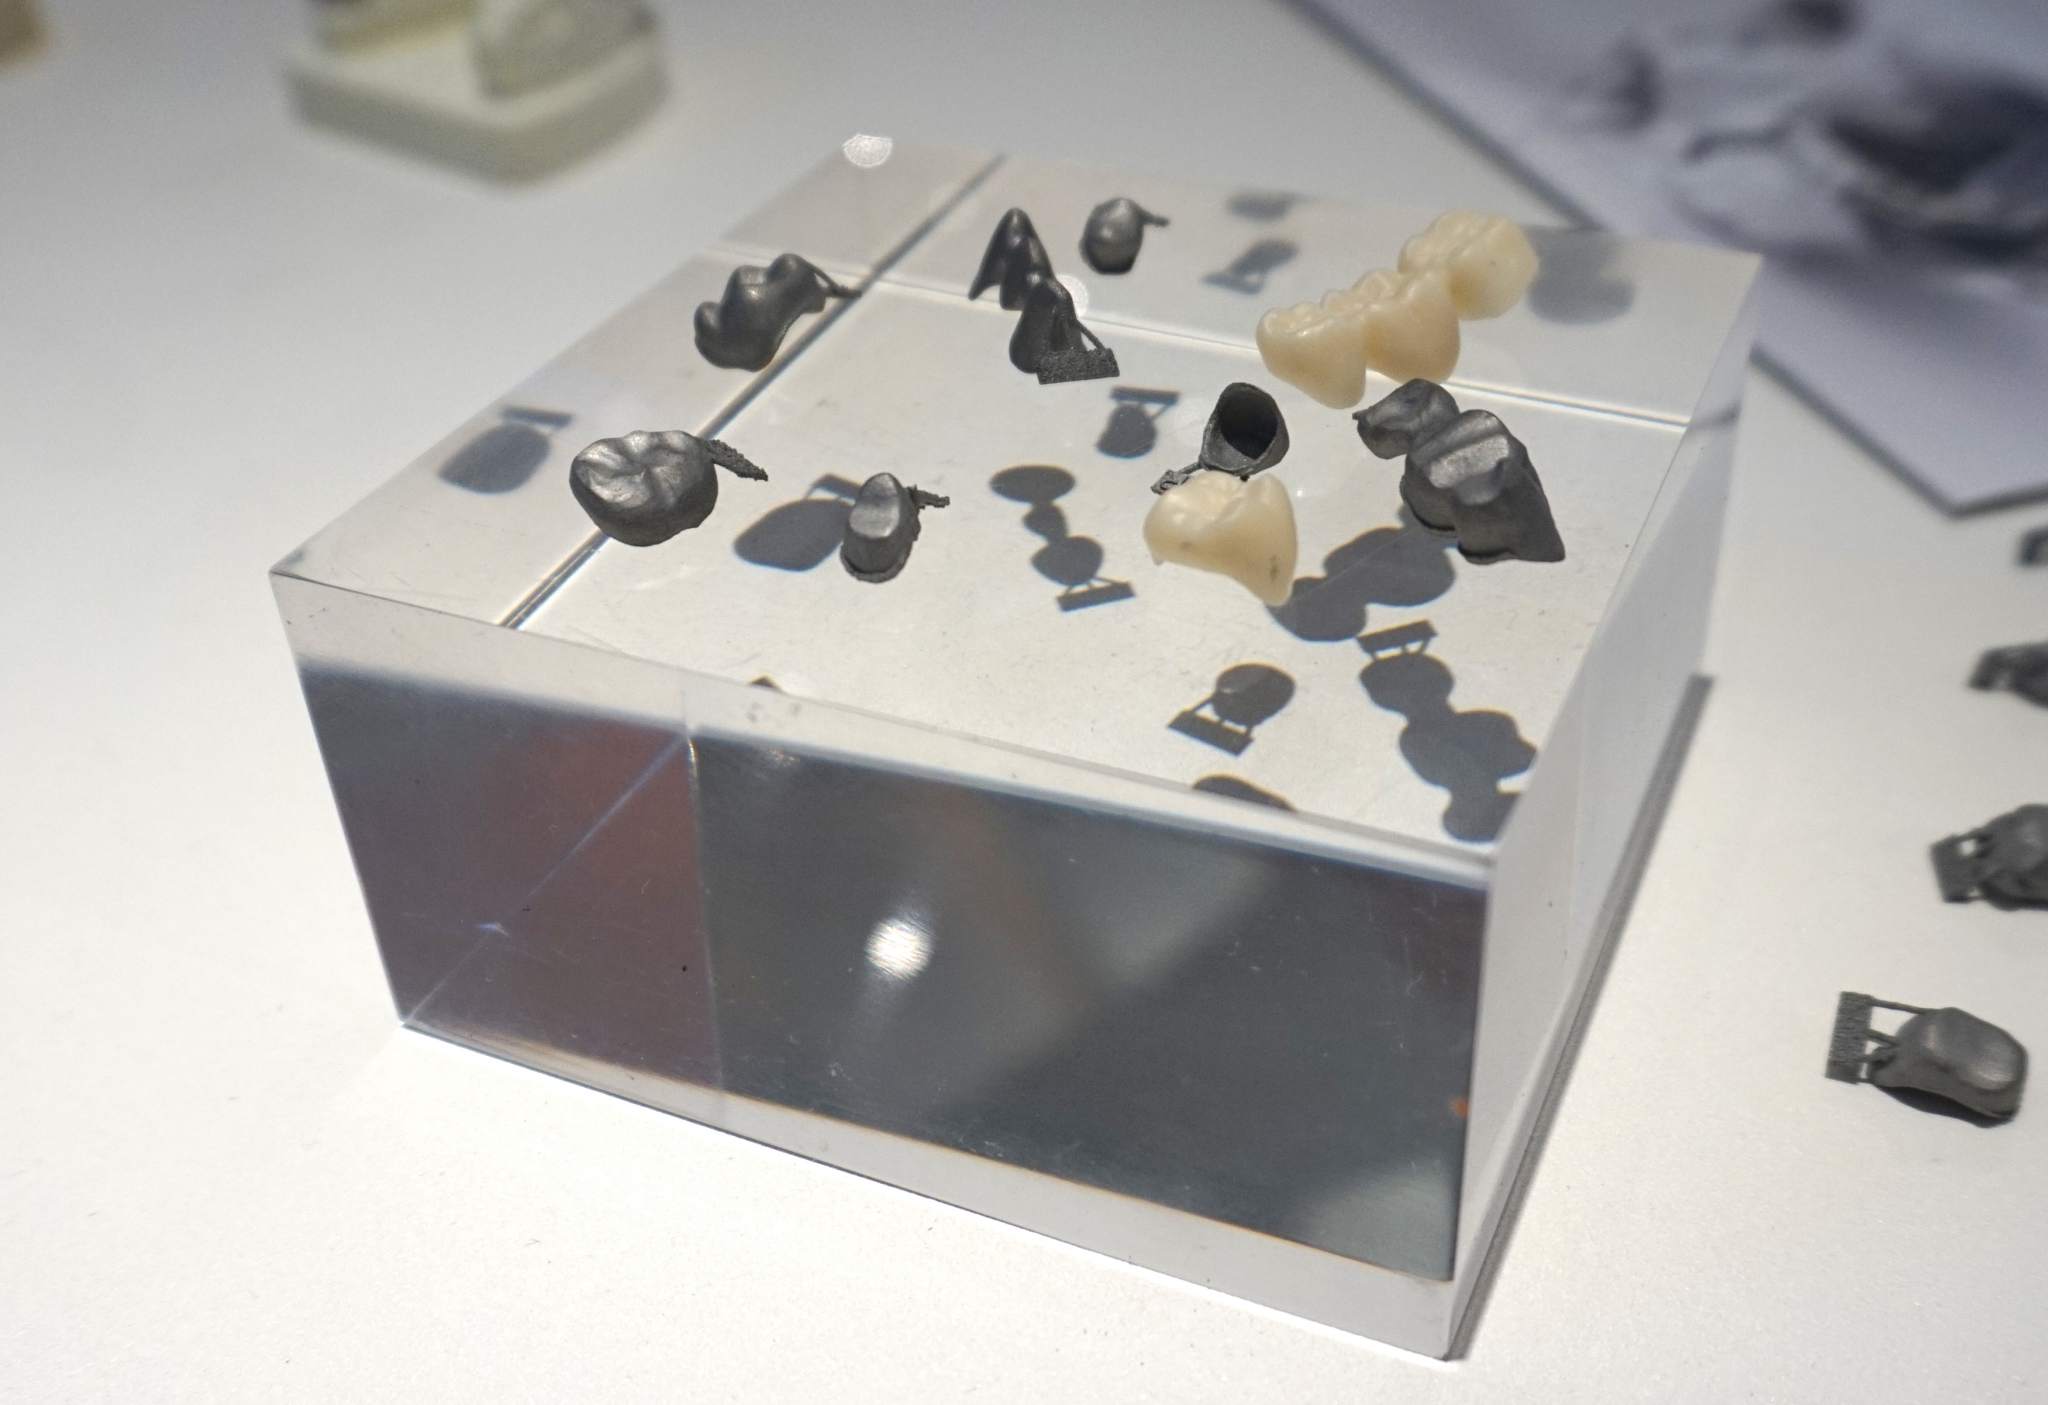 3D printed copings and tooth models by Renishaw at the 3D Medical Expo 2017. Photo by Beau Jackson.